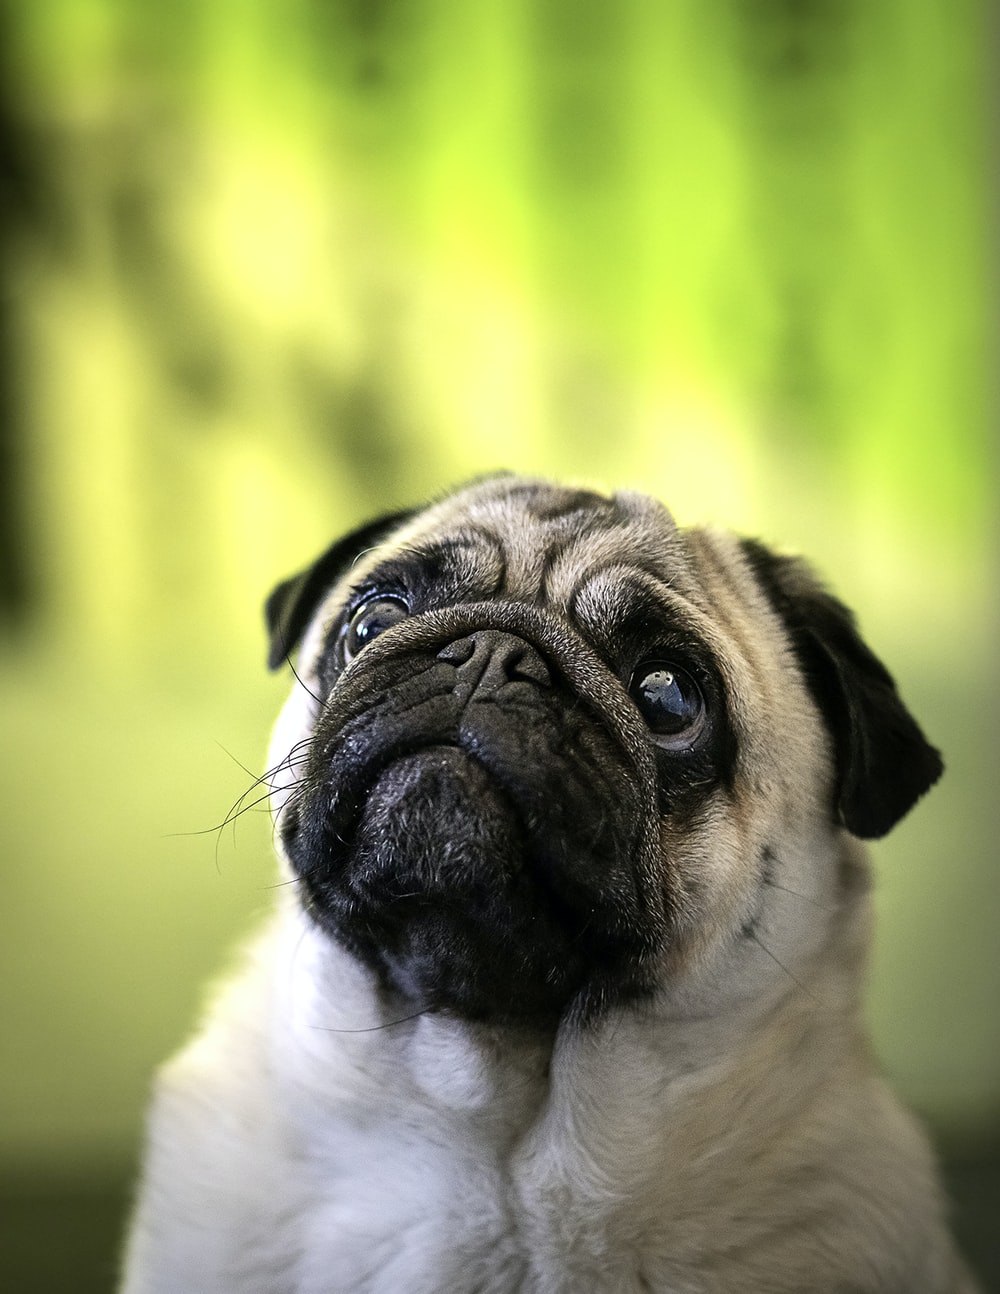 Pug Dog Picture. Download Free Image